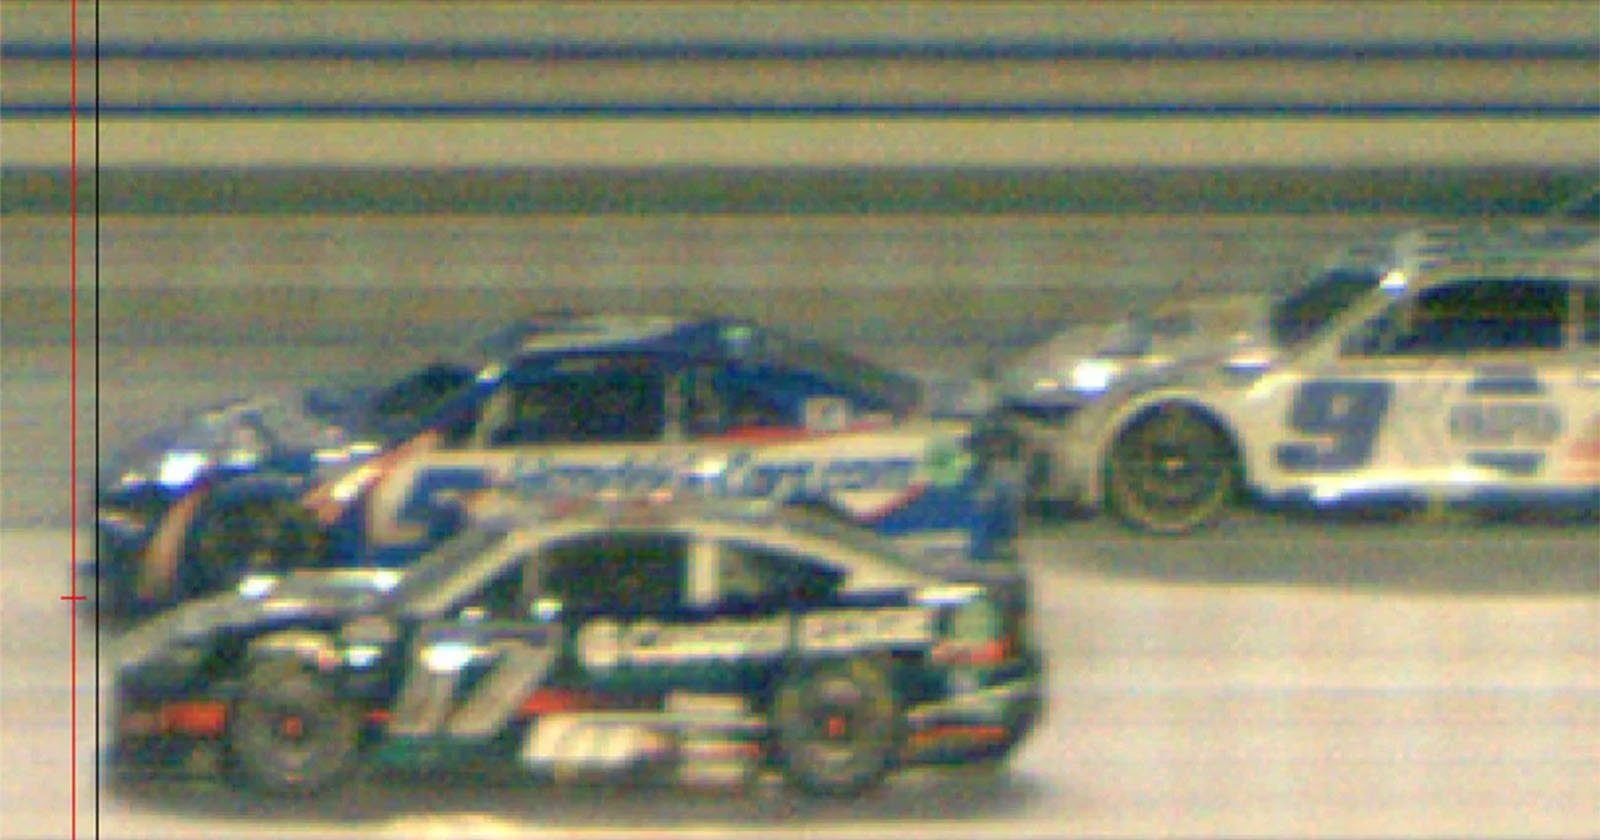 Blurry image of three race cars on a track, numbered consecutively, prominently displaying race decals and colors, captured in motion under nighttime lighting.